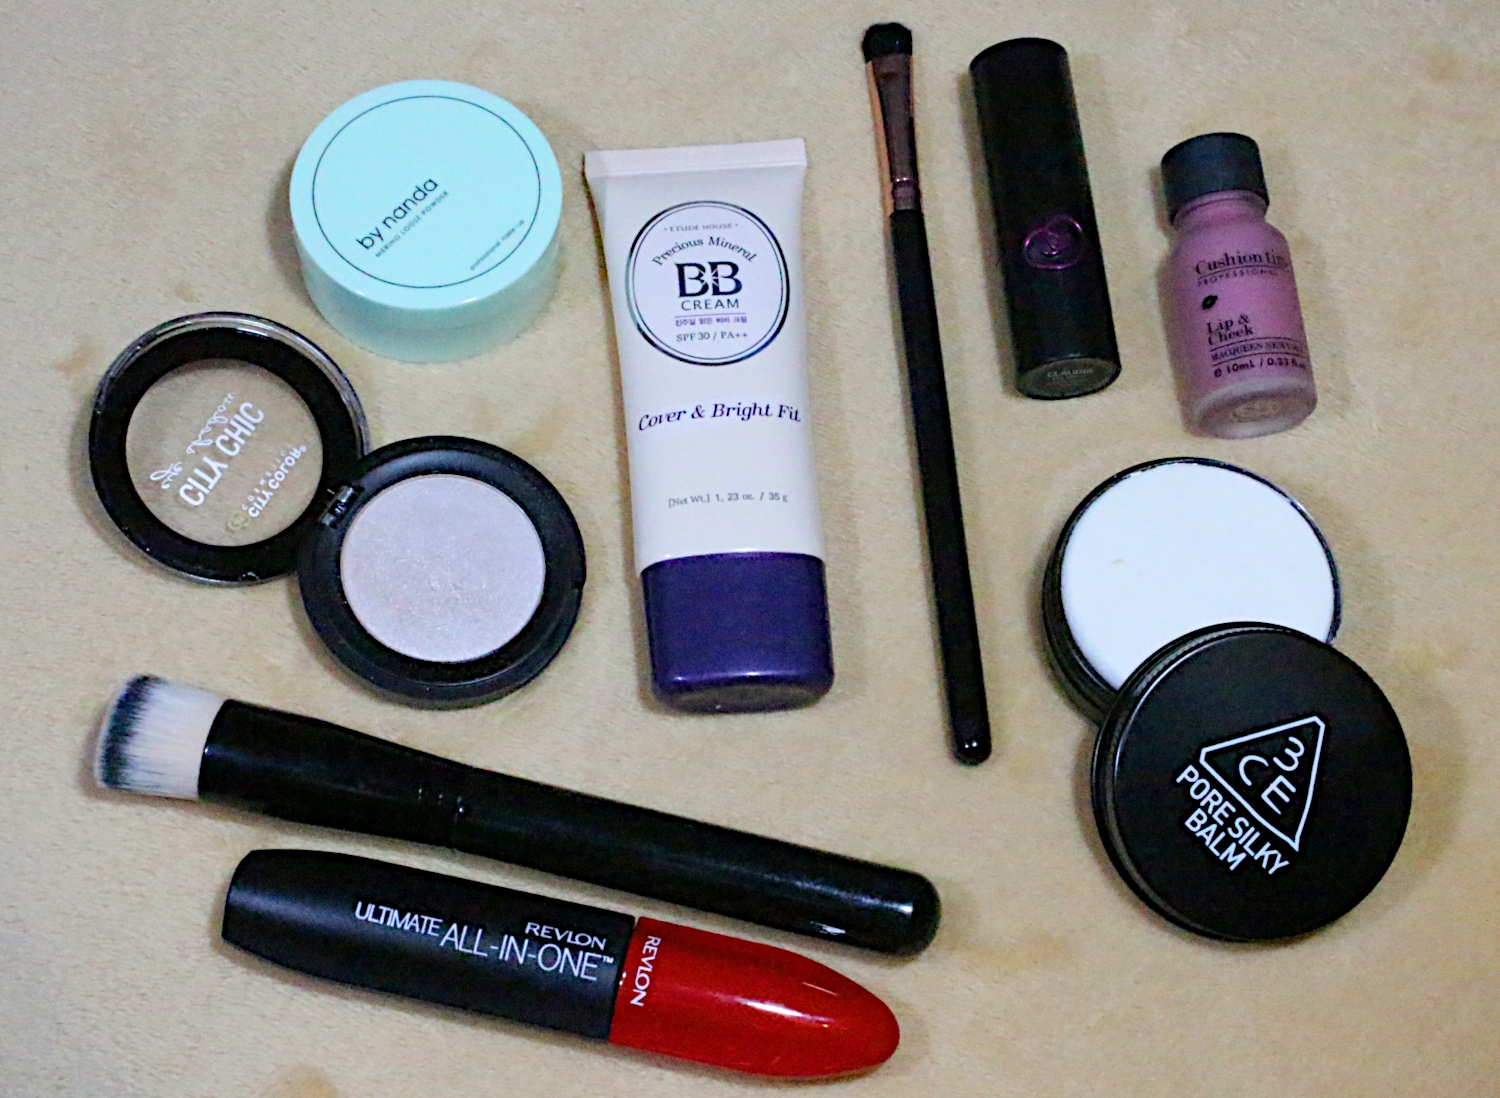 a flatlay of various makeup and beauty products